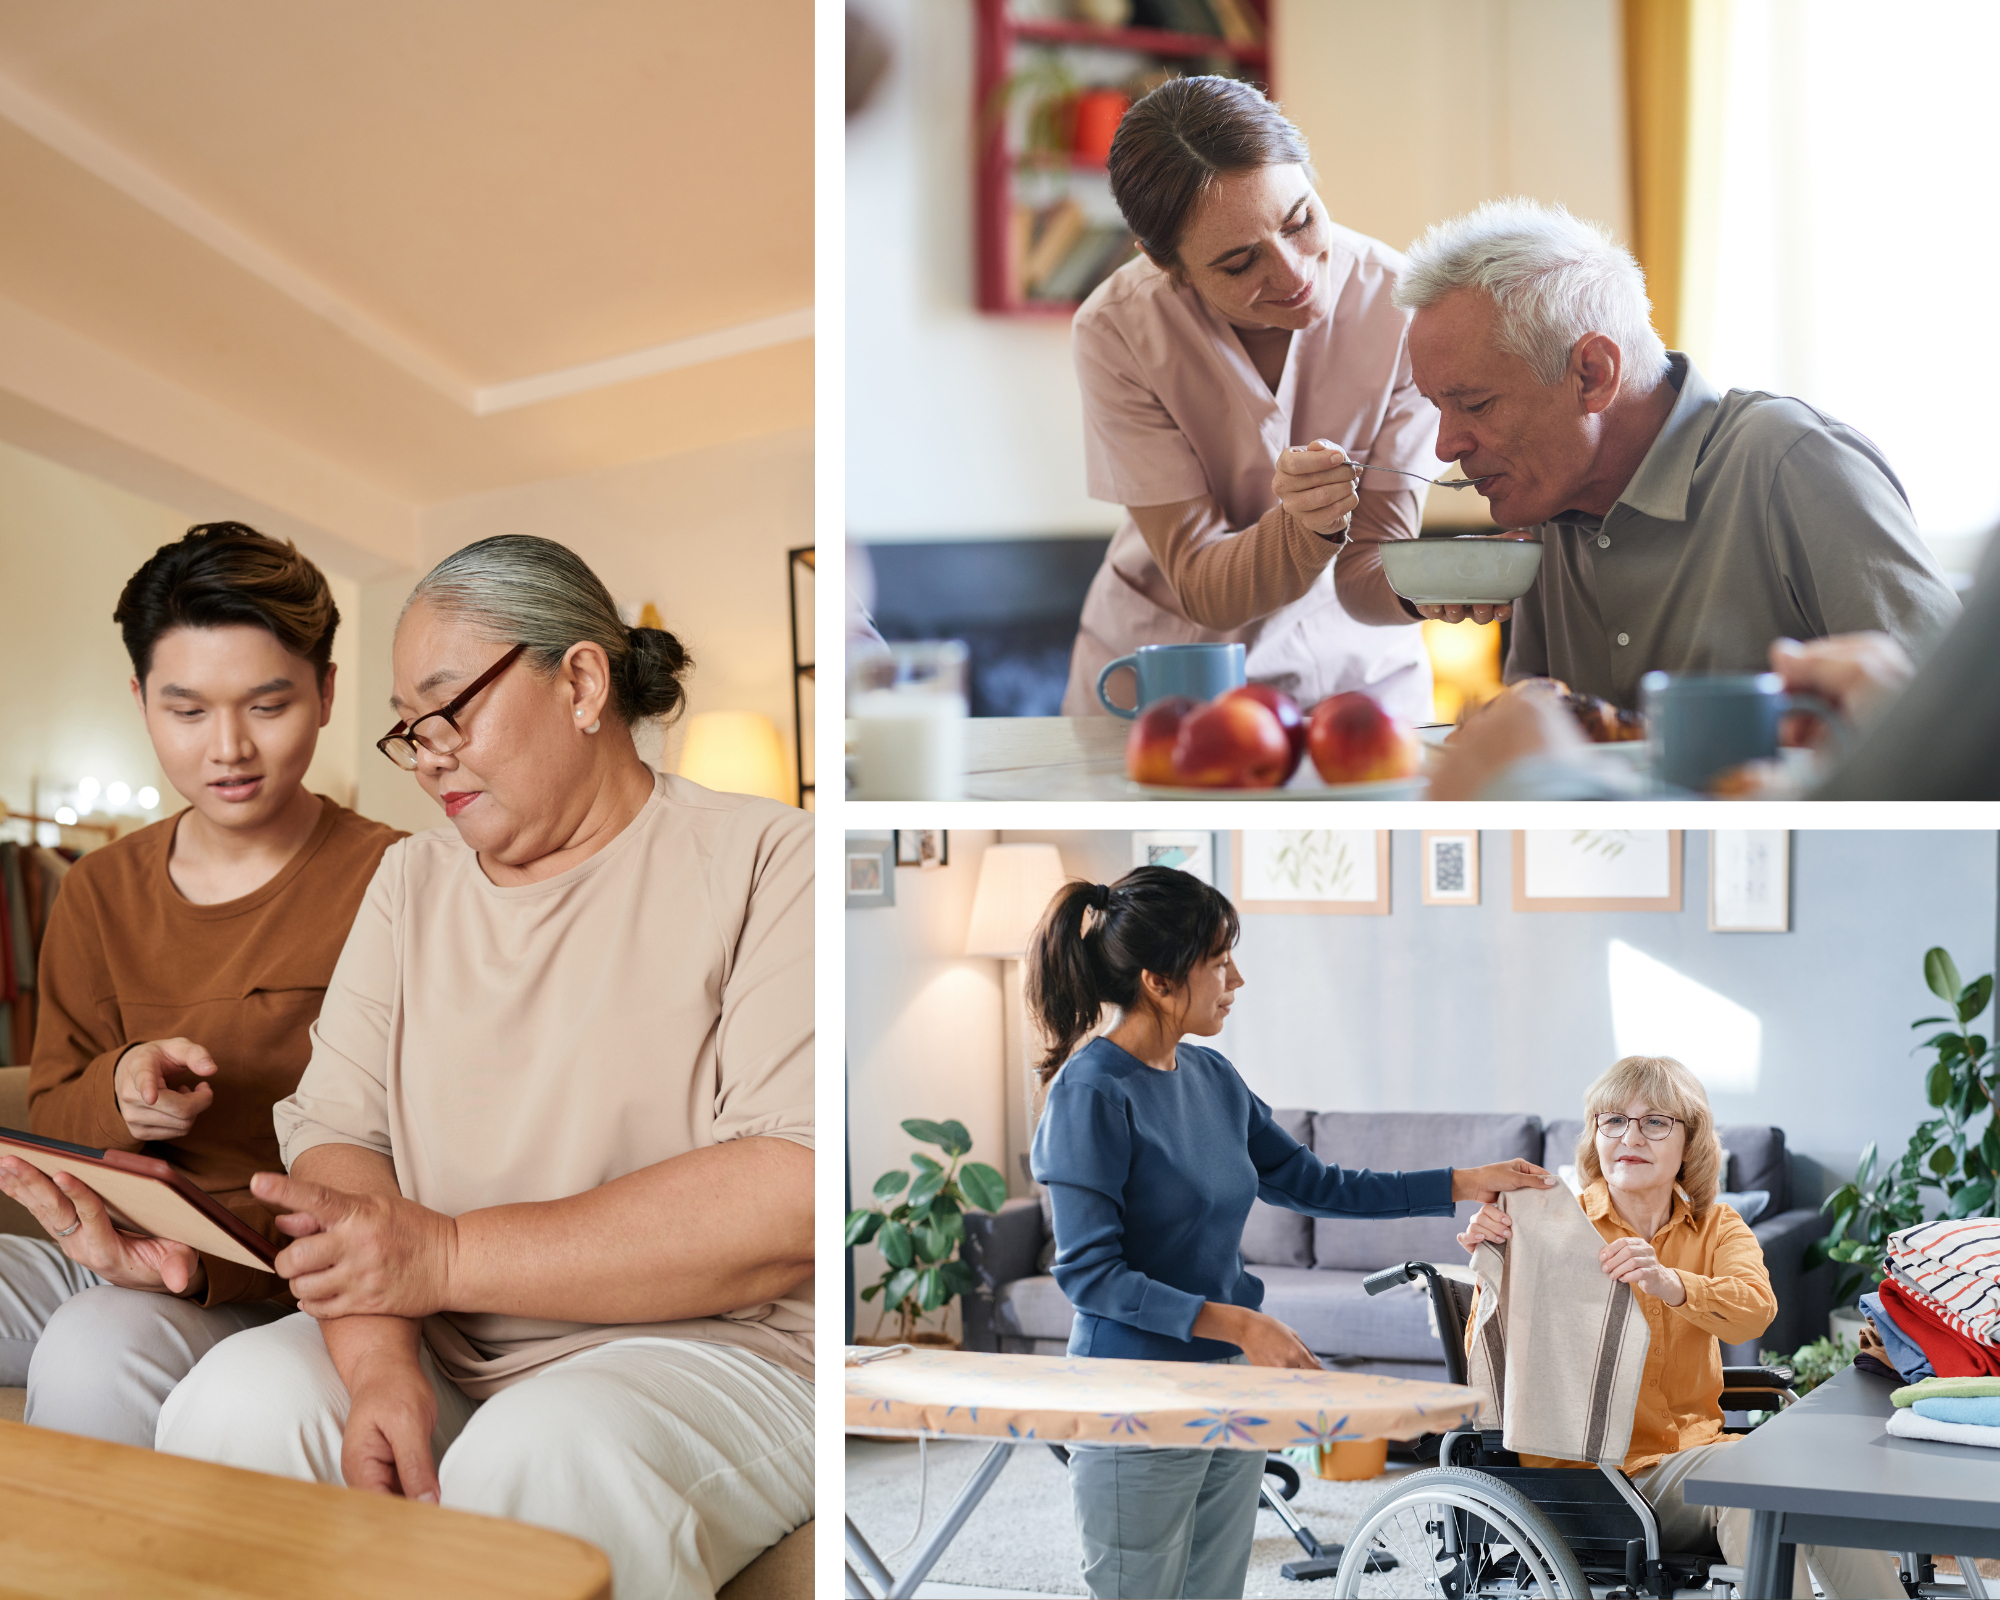 Caregivers can help you manage chronic conditions